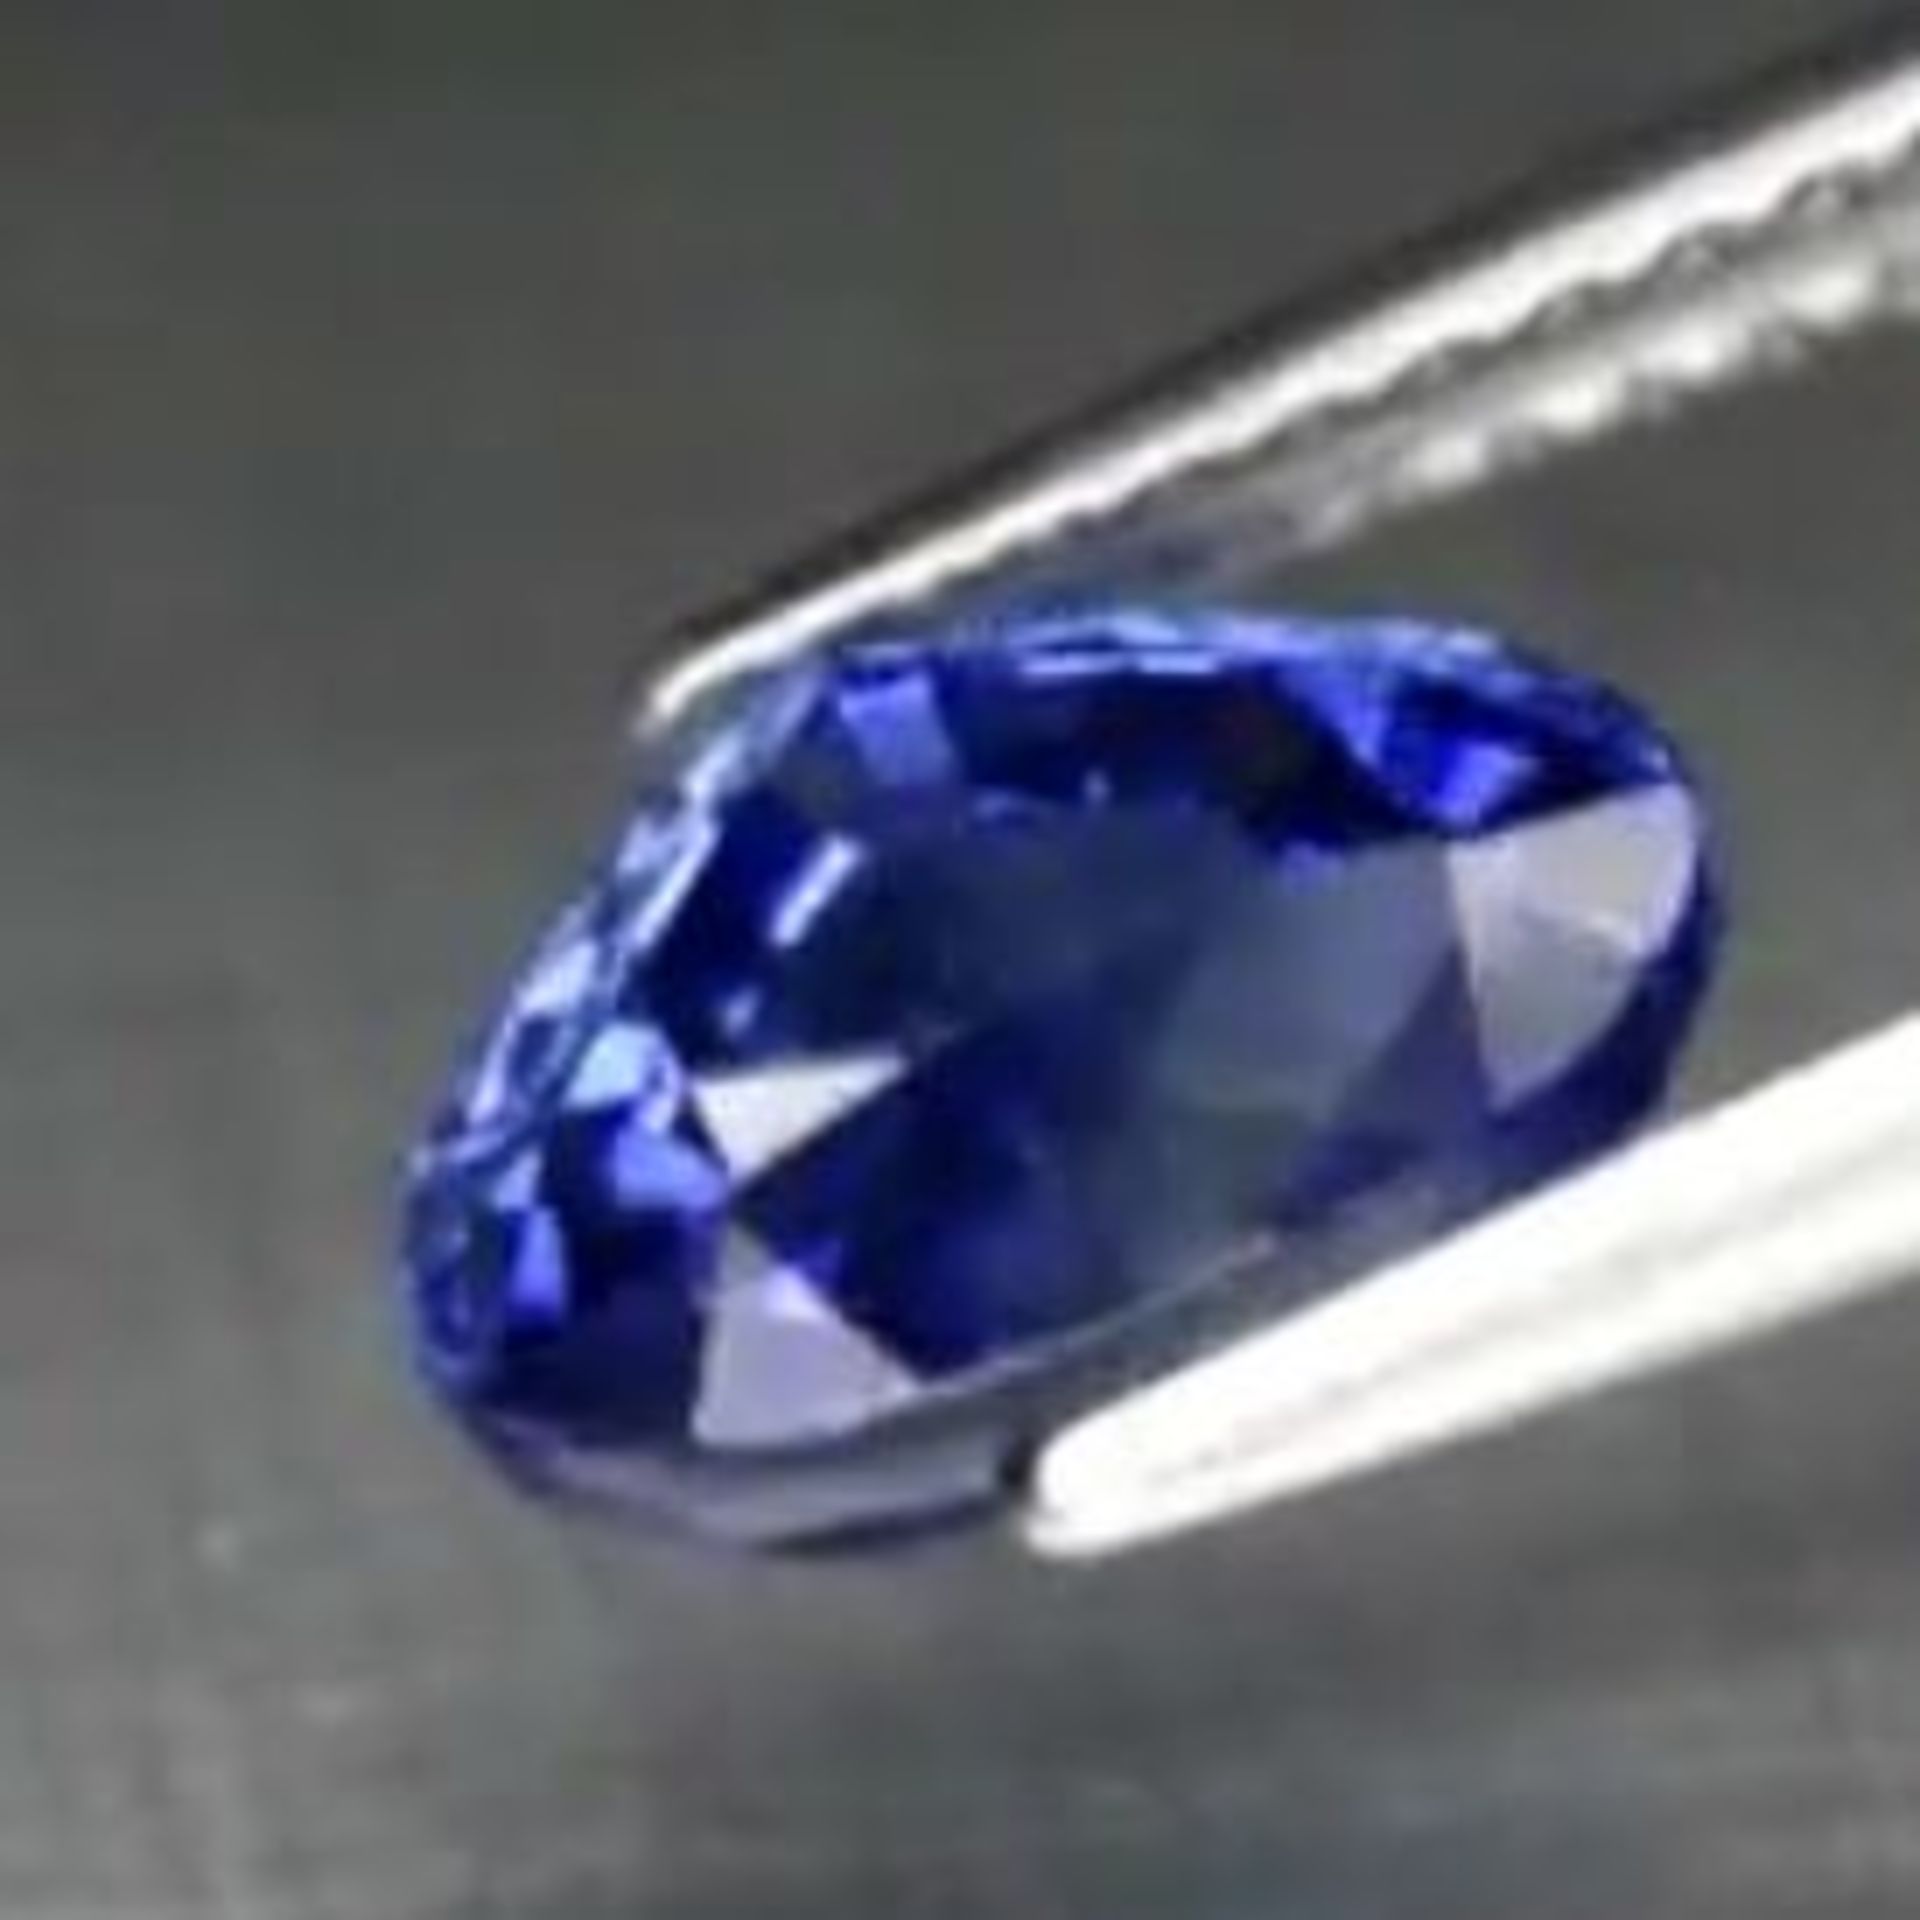 GIA Certified 2.08 ct. Blue Sapphire - Image 7 of 10